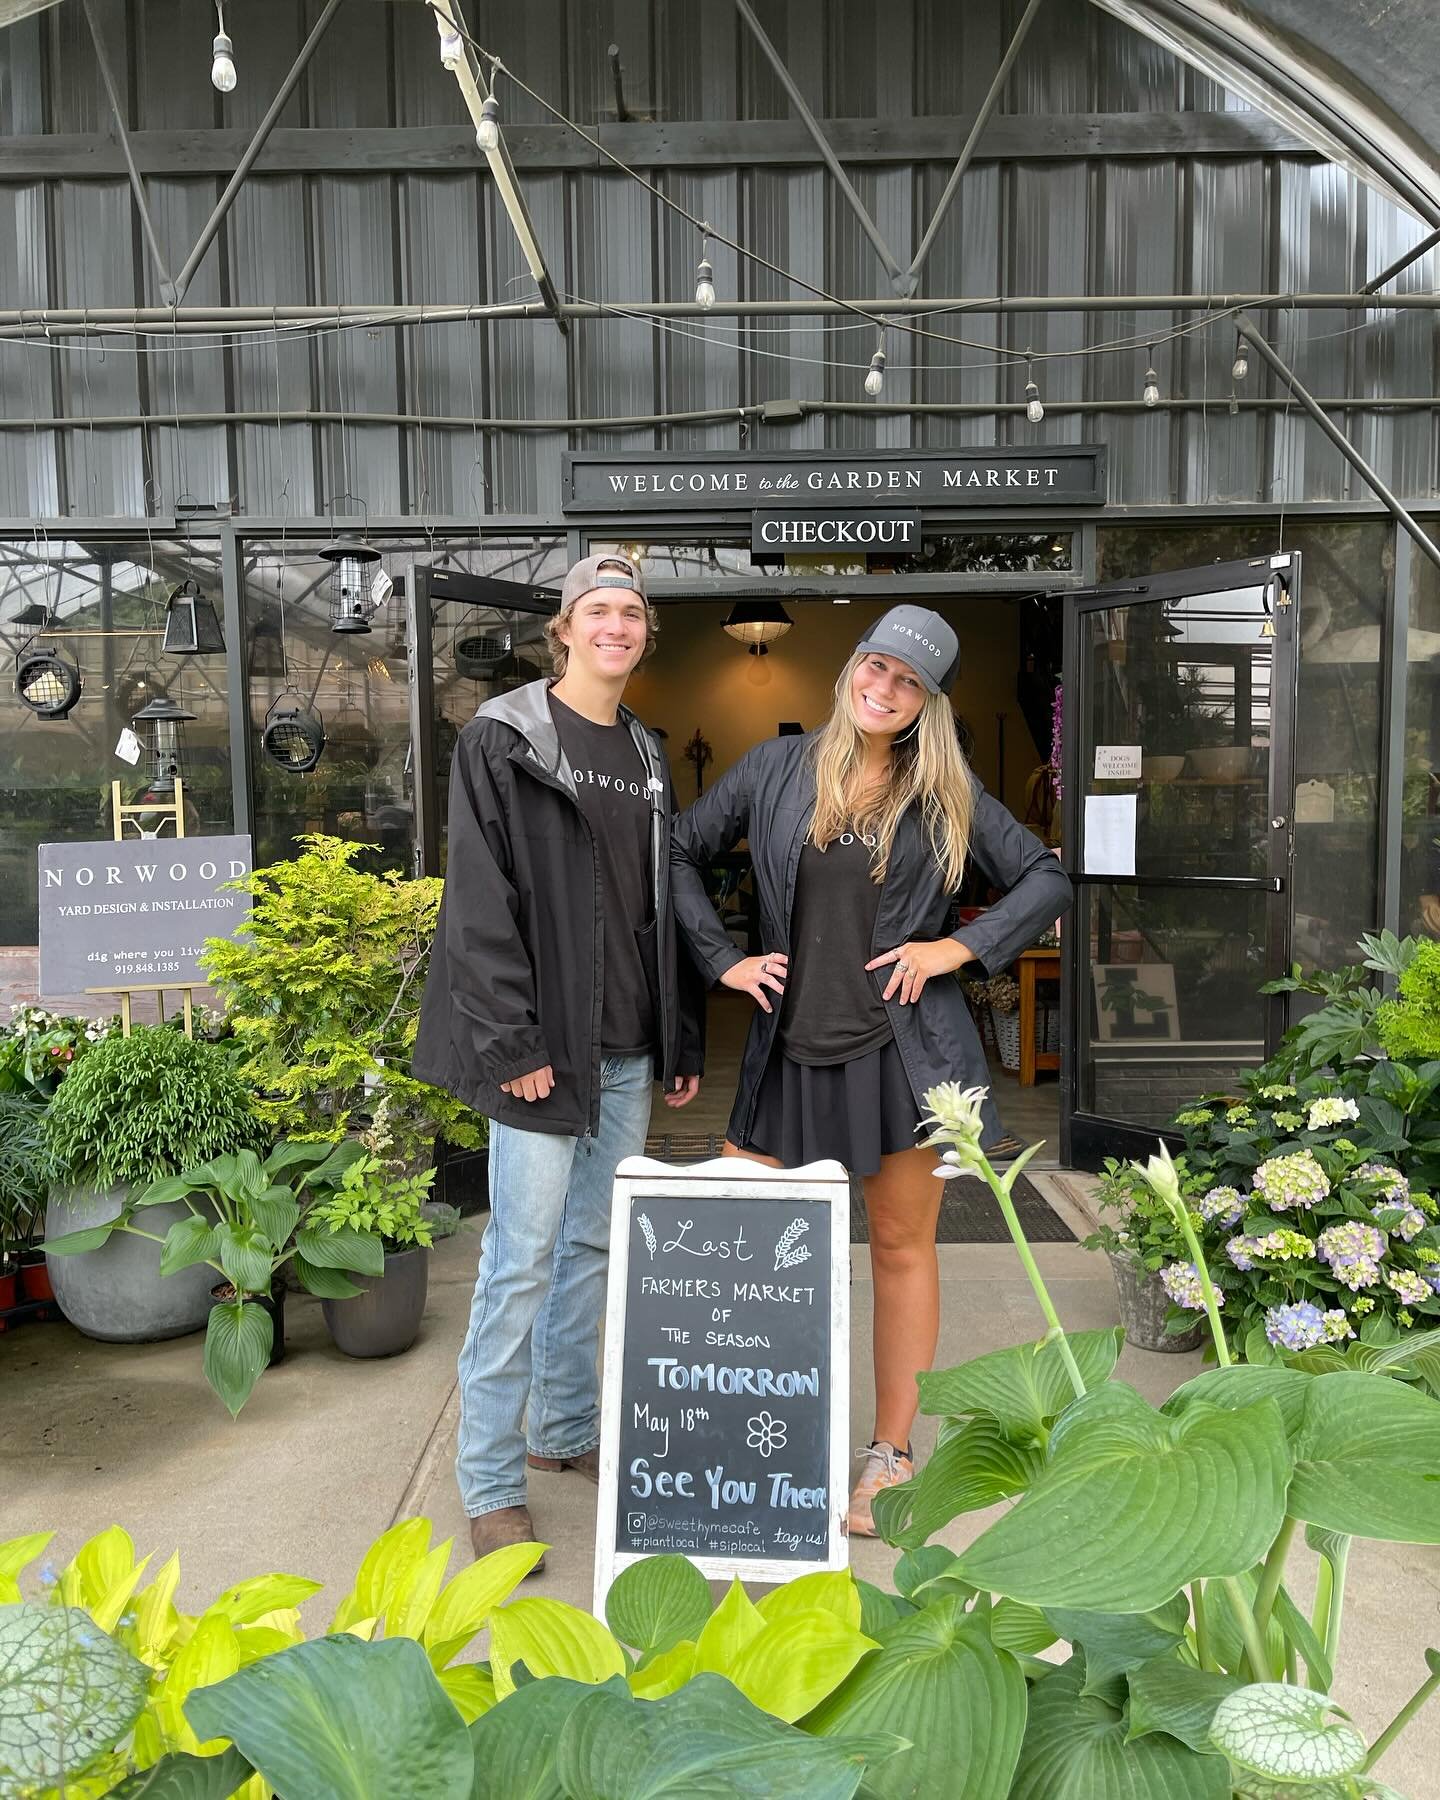 FLASH RAINY DAY SALE ☔️

Saturday, May 18th!

Come check out our last Farmers Market &amp; mention this post at checkout to receive:

🌧️ 20% of ALL grasses
🌧️ 20% of Holly shrubs 
🌧️ 50% ALL vegetables 🥦 

Farmers Market from 9:00-2:00 with local